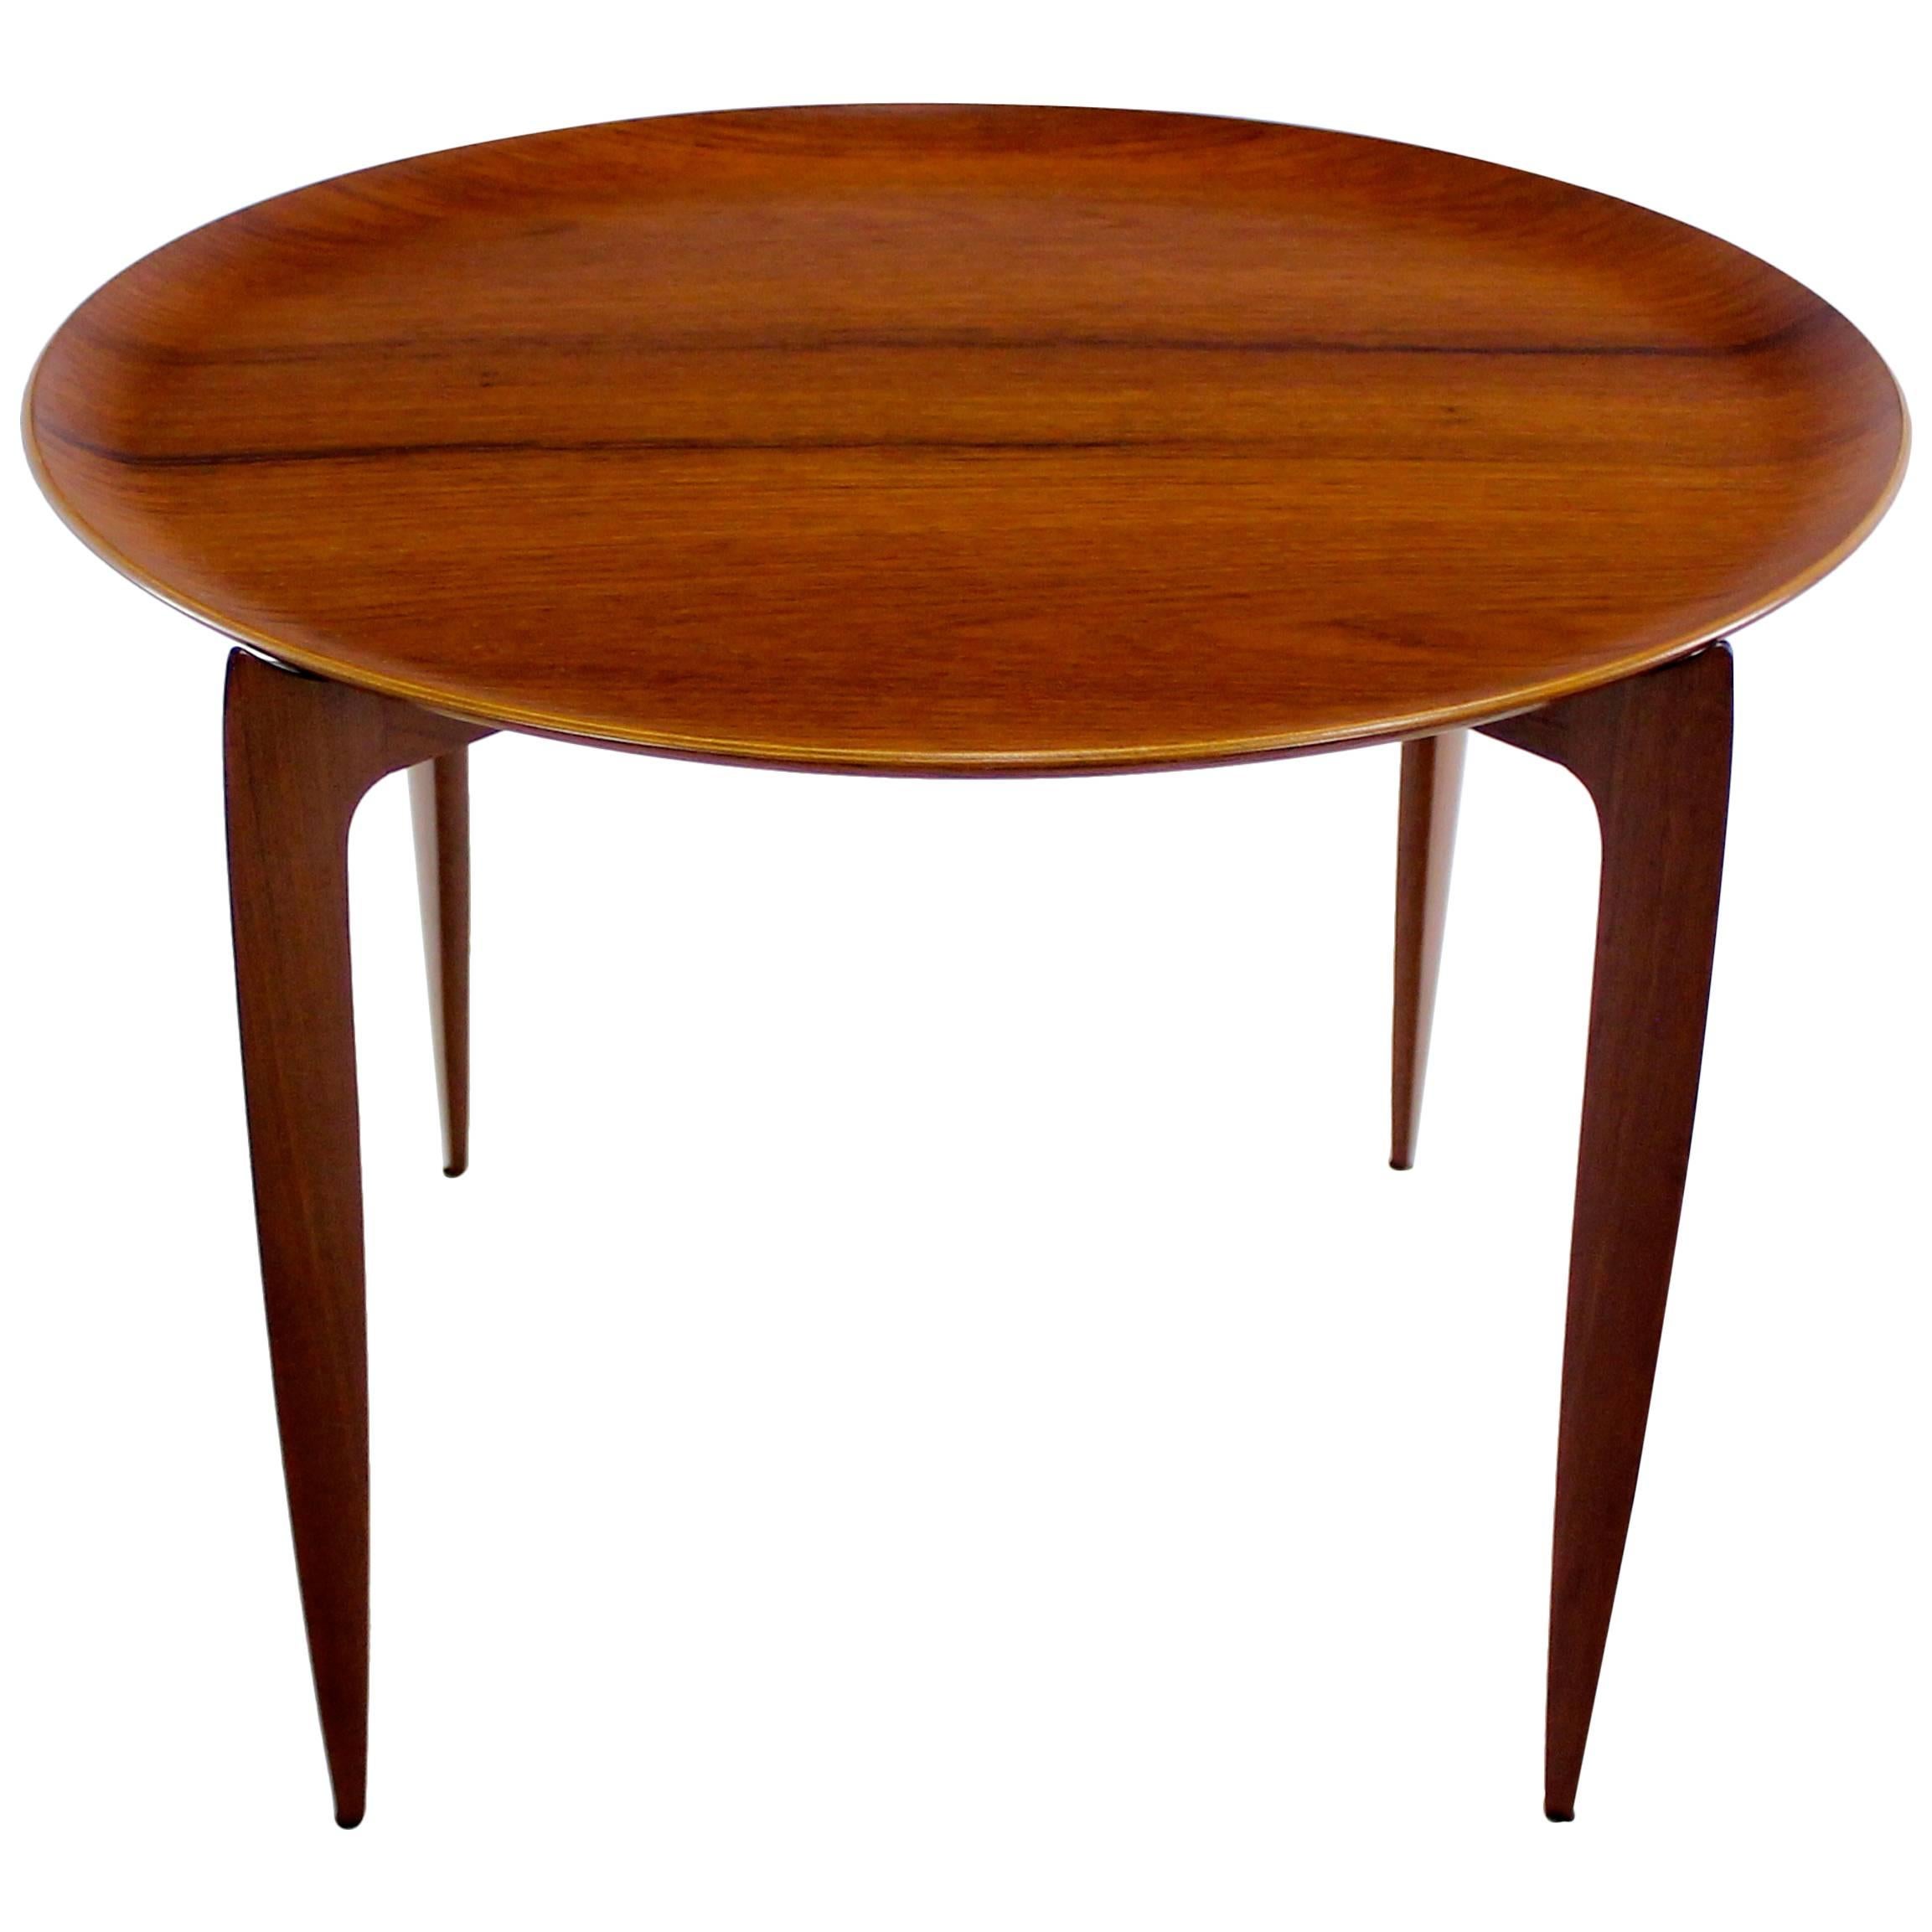 Danish Modern Teak Tray Table Designed by H. Engholm & Svend Aage Willumsen For Sale